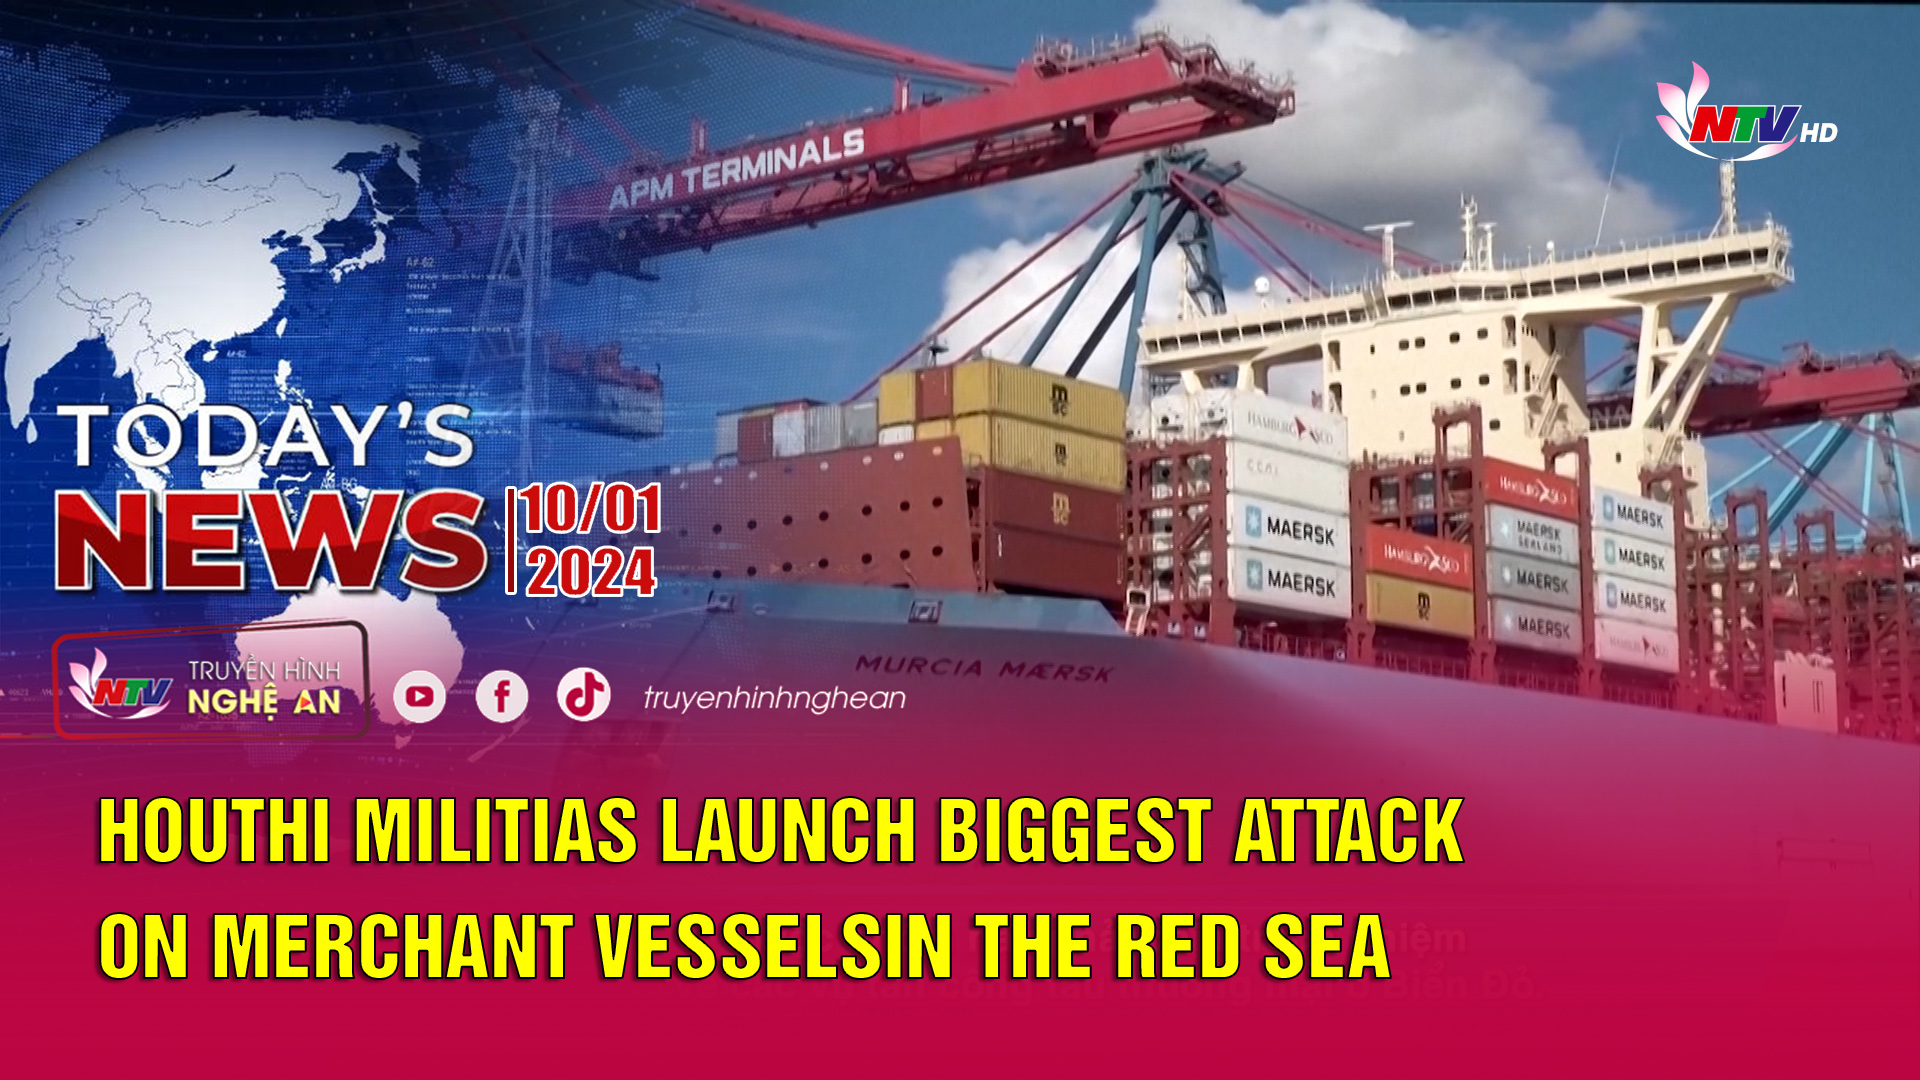 Today's News - 10/01/2024: Houthi militias launch biggest attack on merchant vessels in the Red Sea